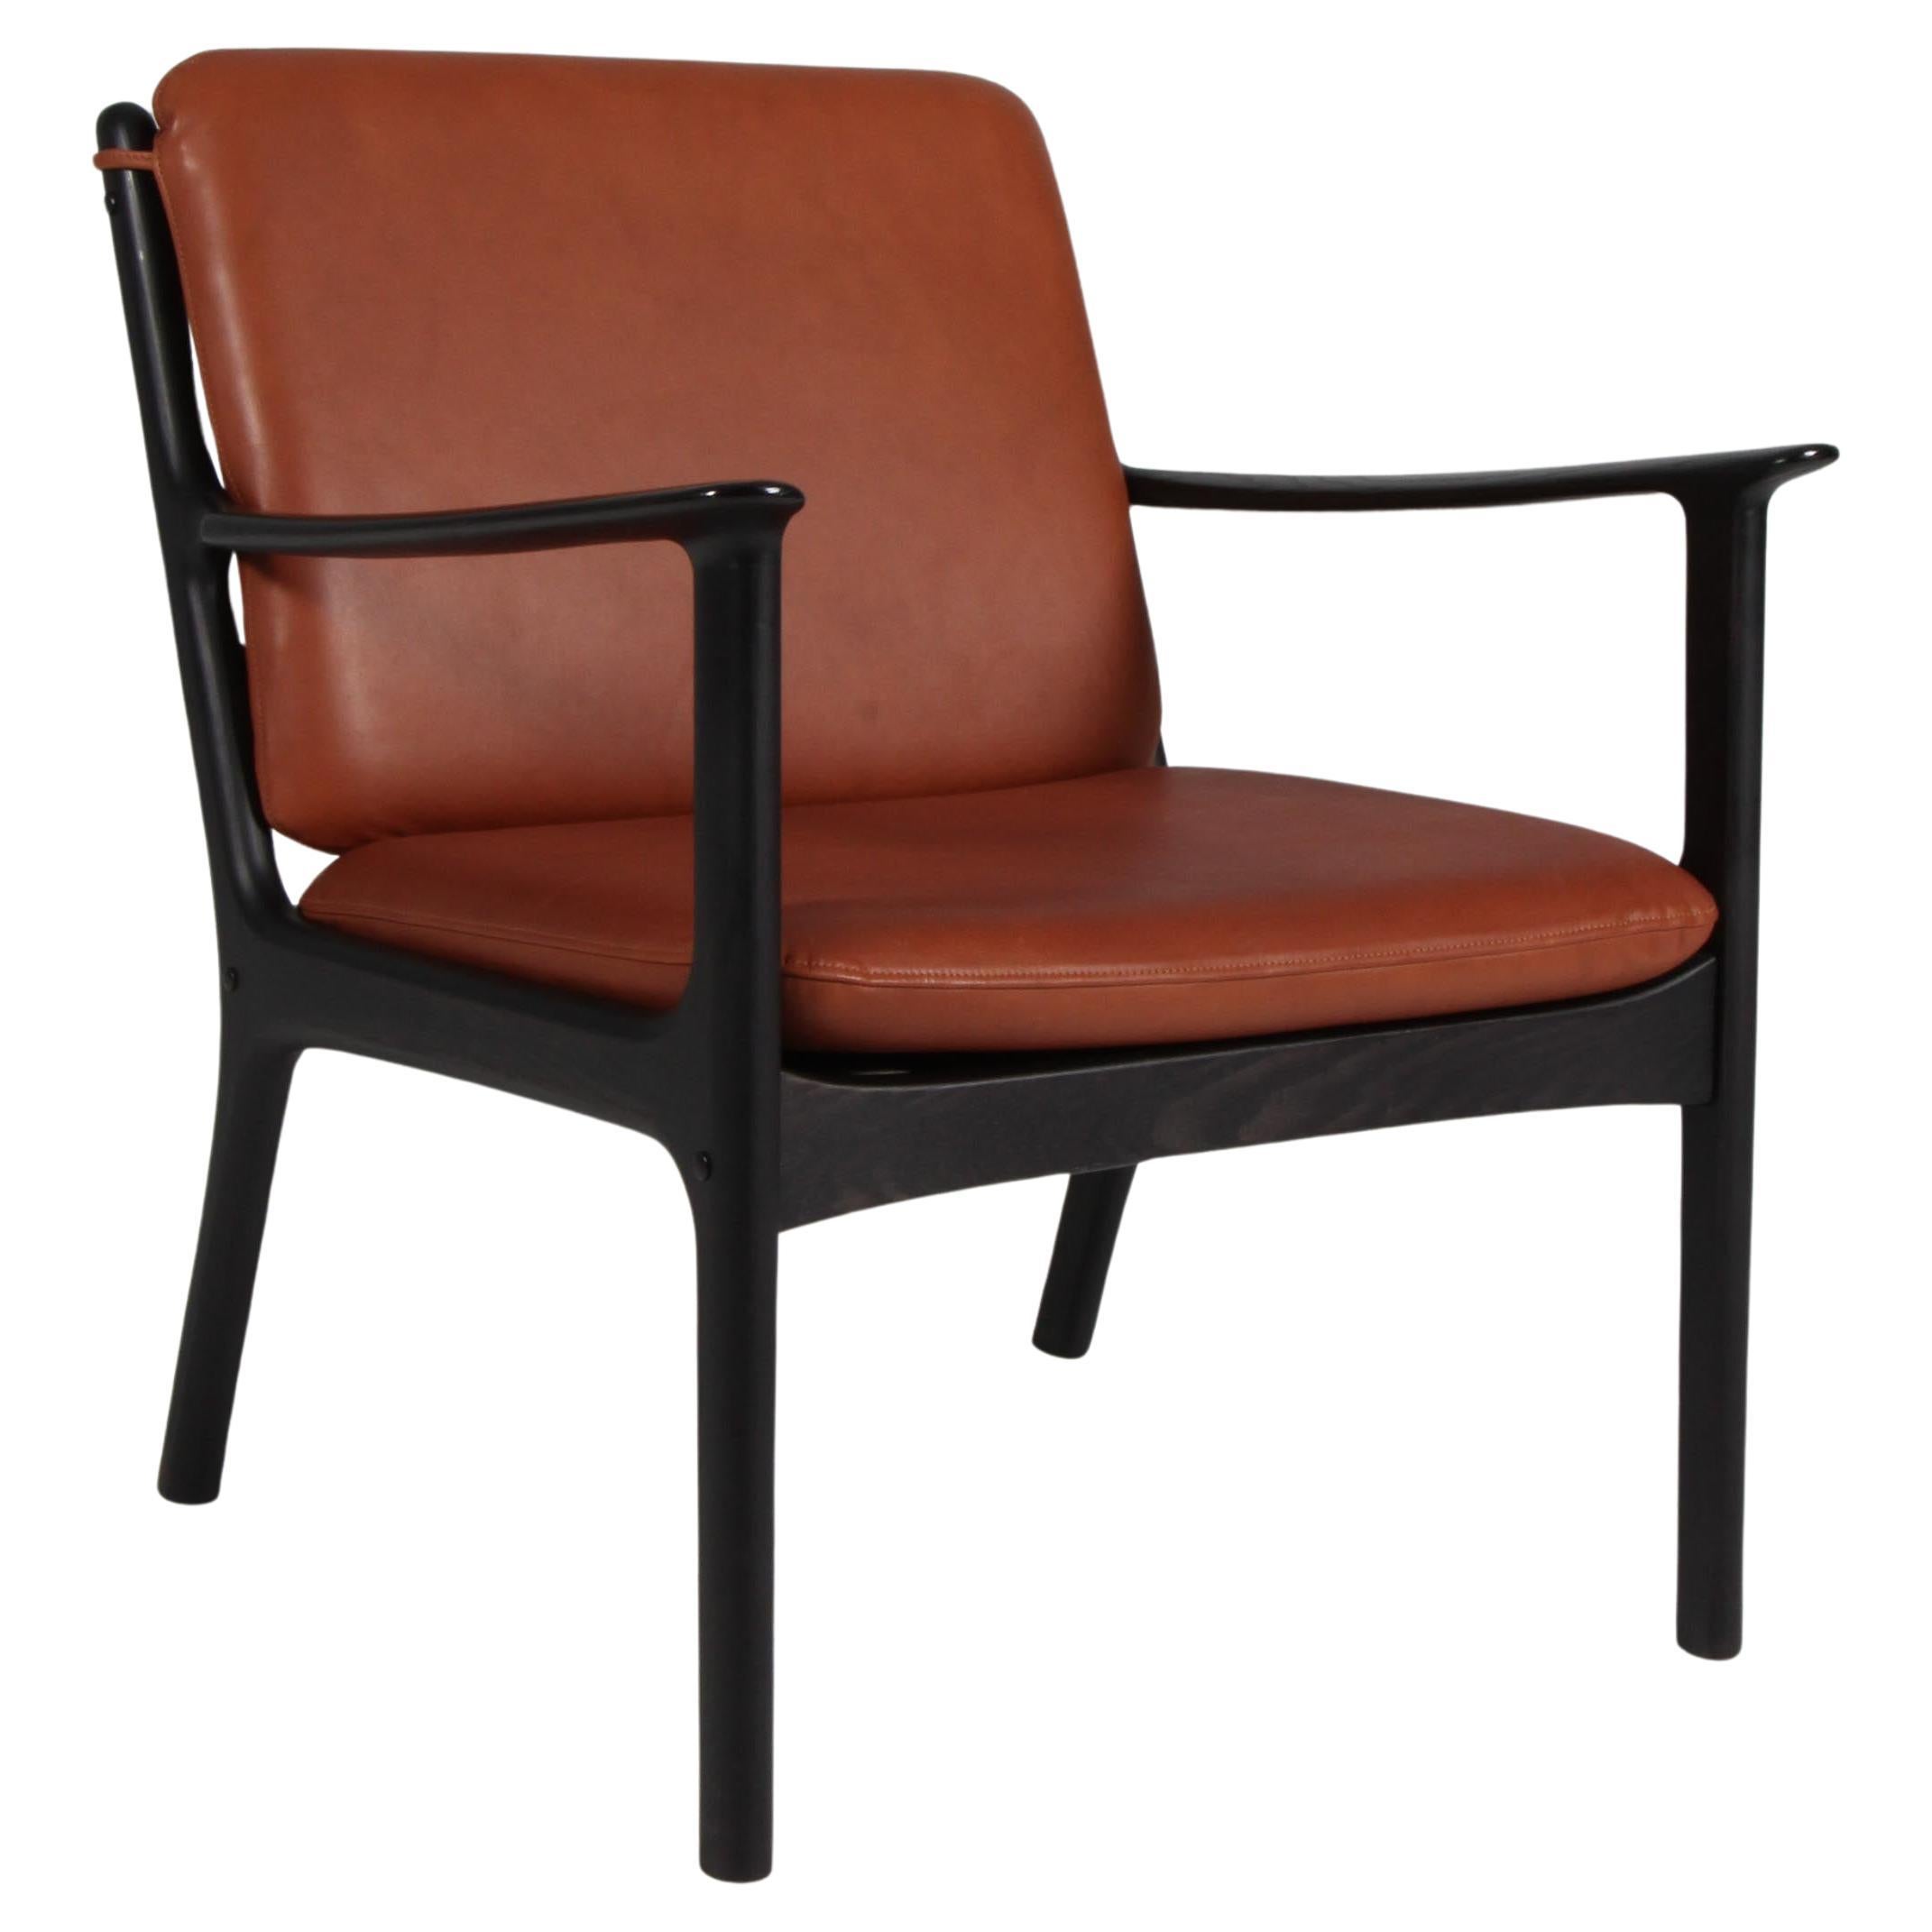 Ole Wanscher Lounge Chair, Model PJ112, stained ash, 1960s For Sale